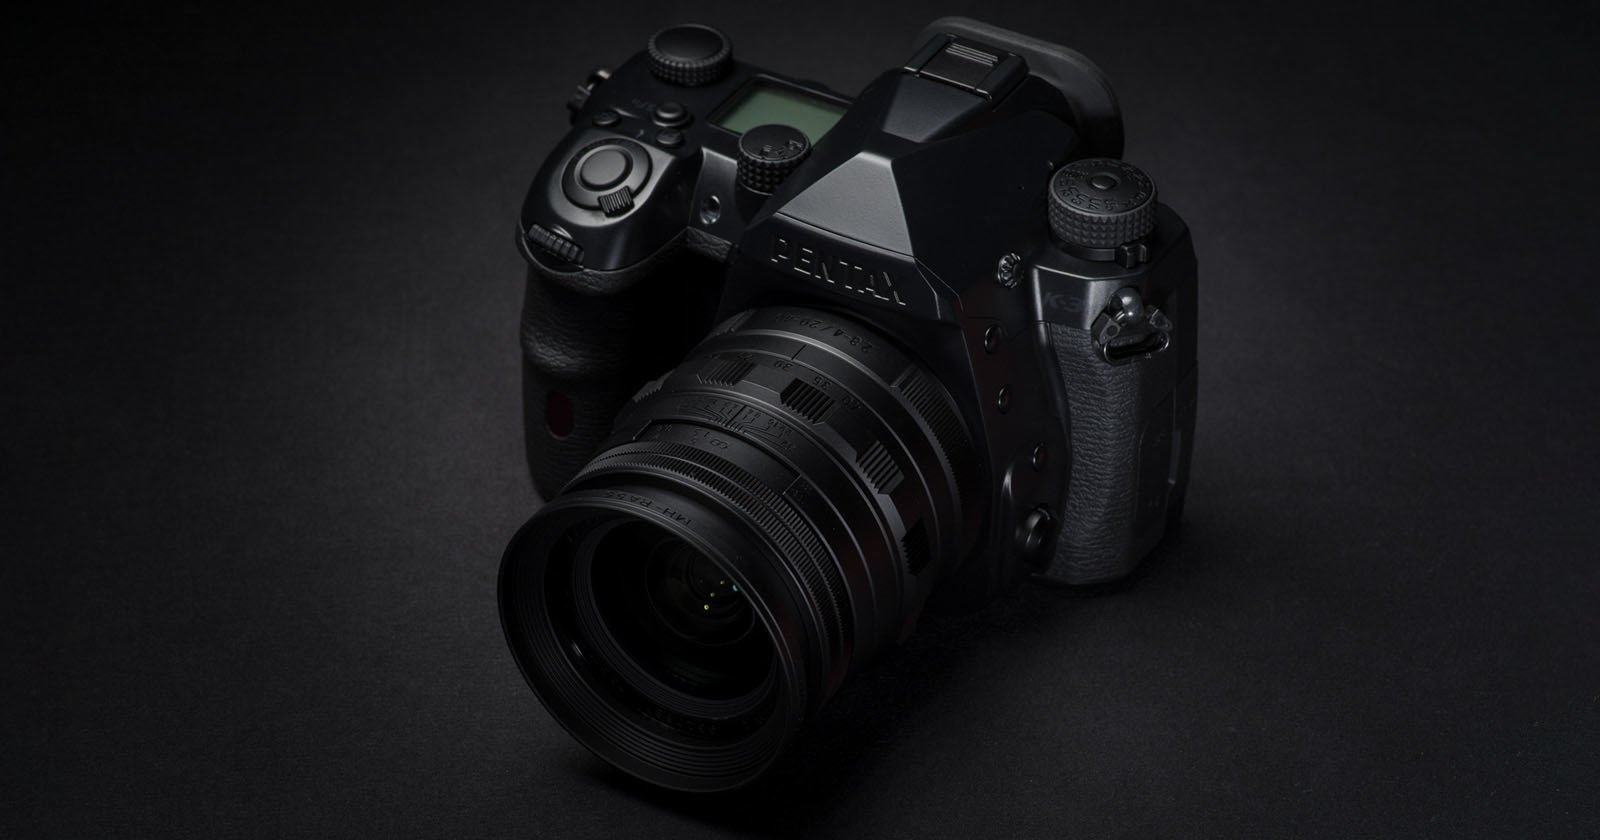 Ricoh is Crowdfunding a Jet Black Limited Edition K-3 Mark III in Japan